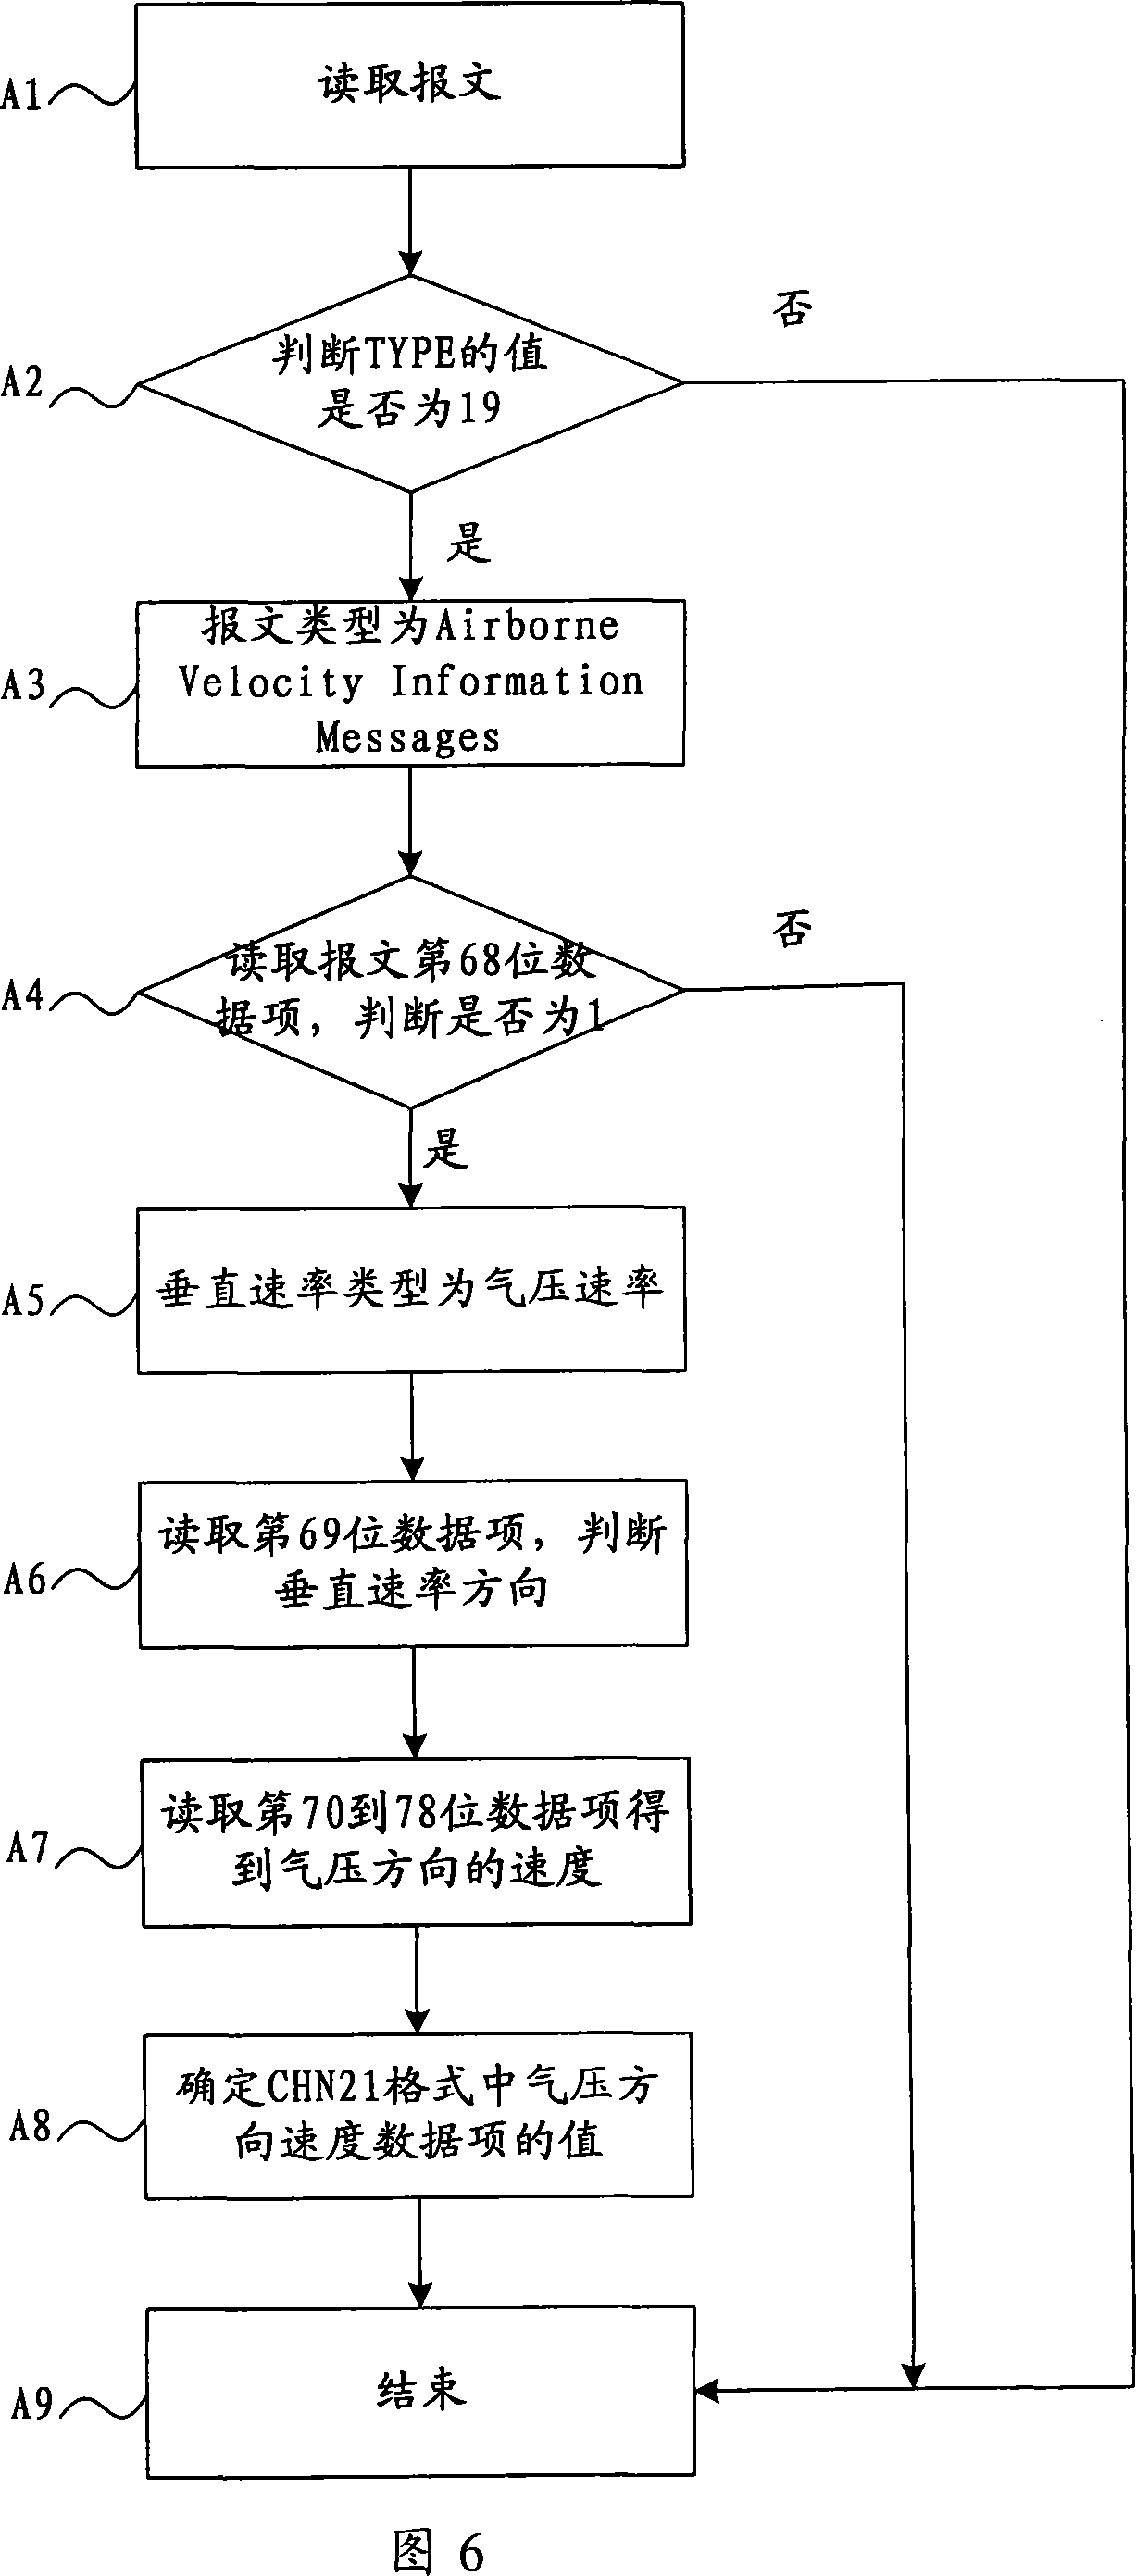 Data format conversion method fitting the need of broadcasting type automatic relevance monitoring message processing request